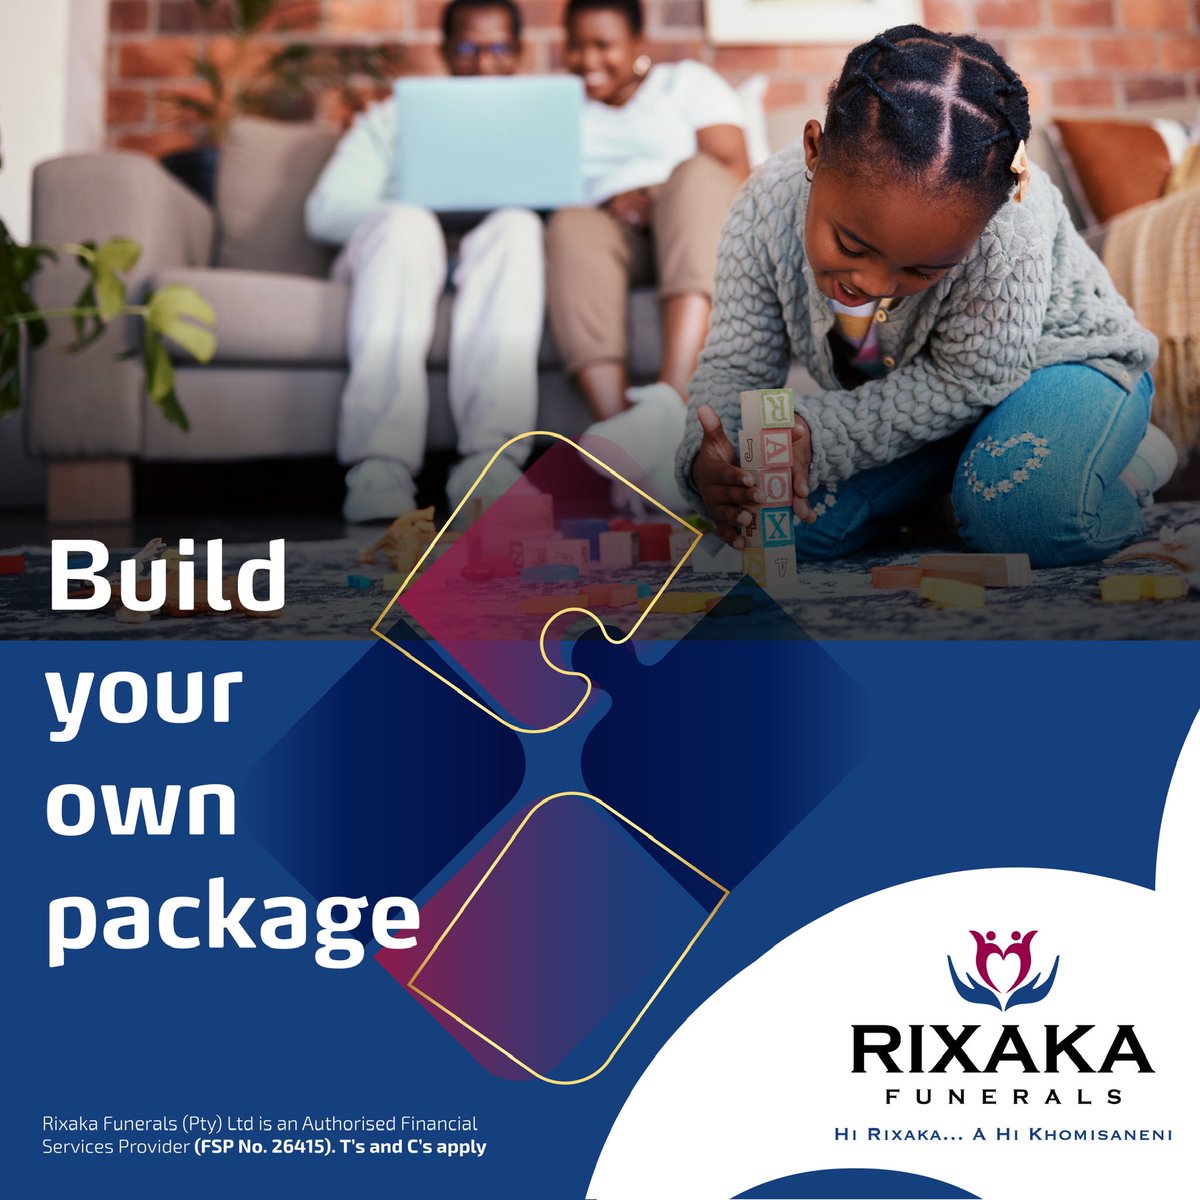 🌟 Introducing our New Generation RBS at Rixaka Funerals! 🌺✨ Customize your package to match your needs perfectly. From repatriation to tombstones, we've got you covered. 💐 #RixakaFunerals #CustomizedServices #TailoredForYou #FuneralOptions #MemorialServices #YourChoiceMatters